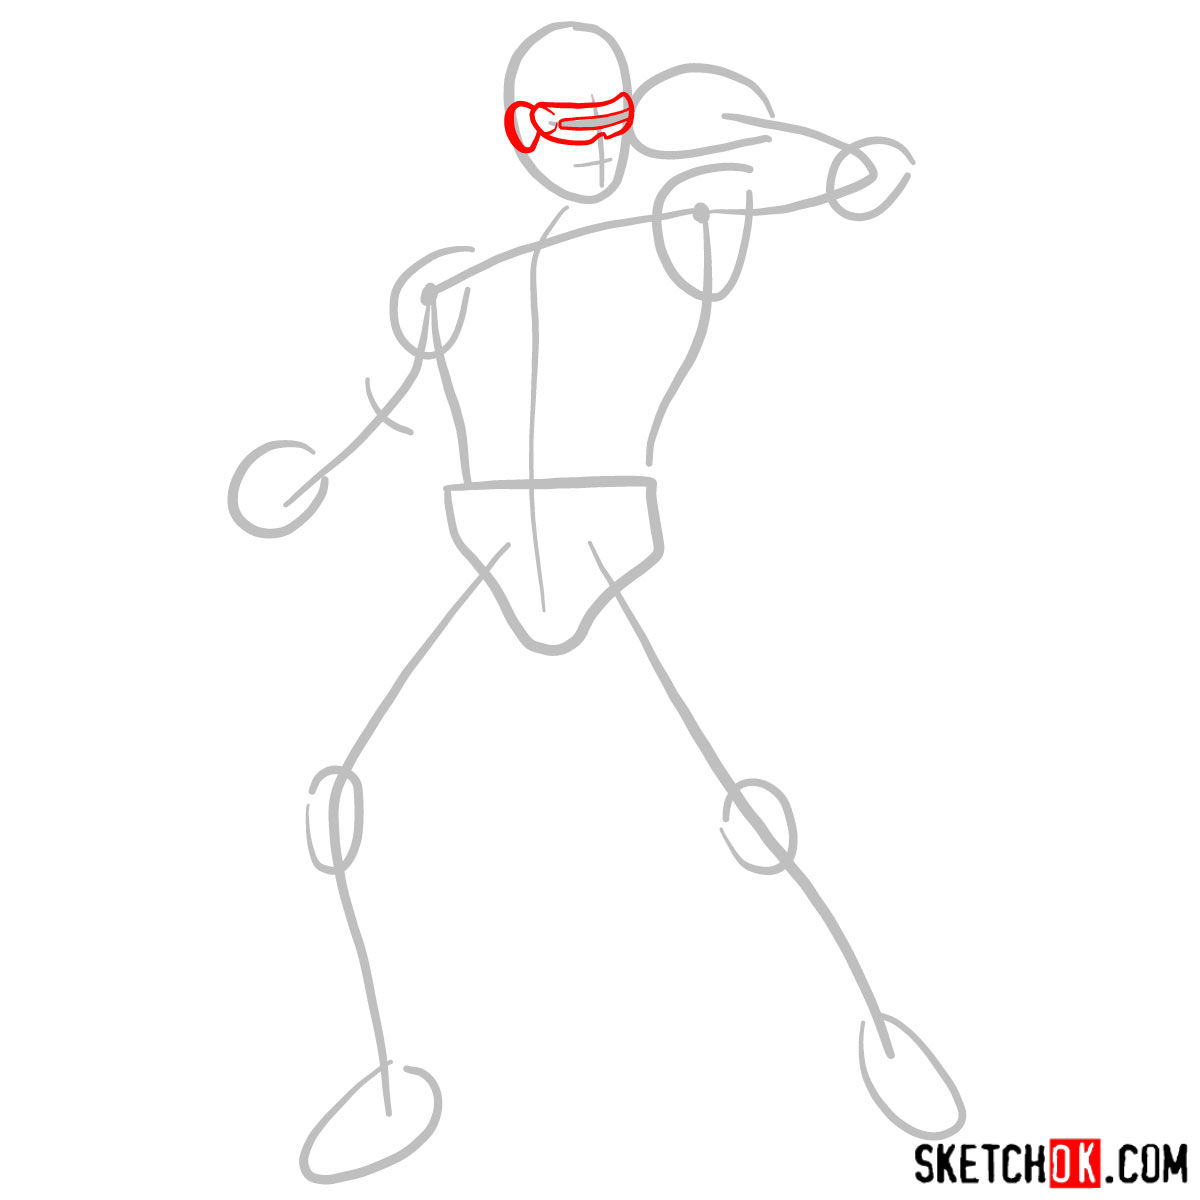 How to draw Cyclops from X-Men - step 02